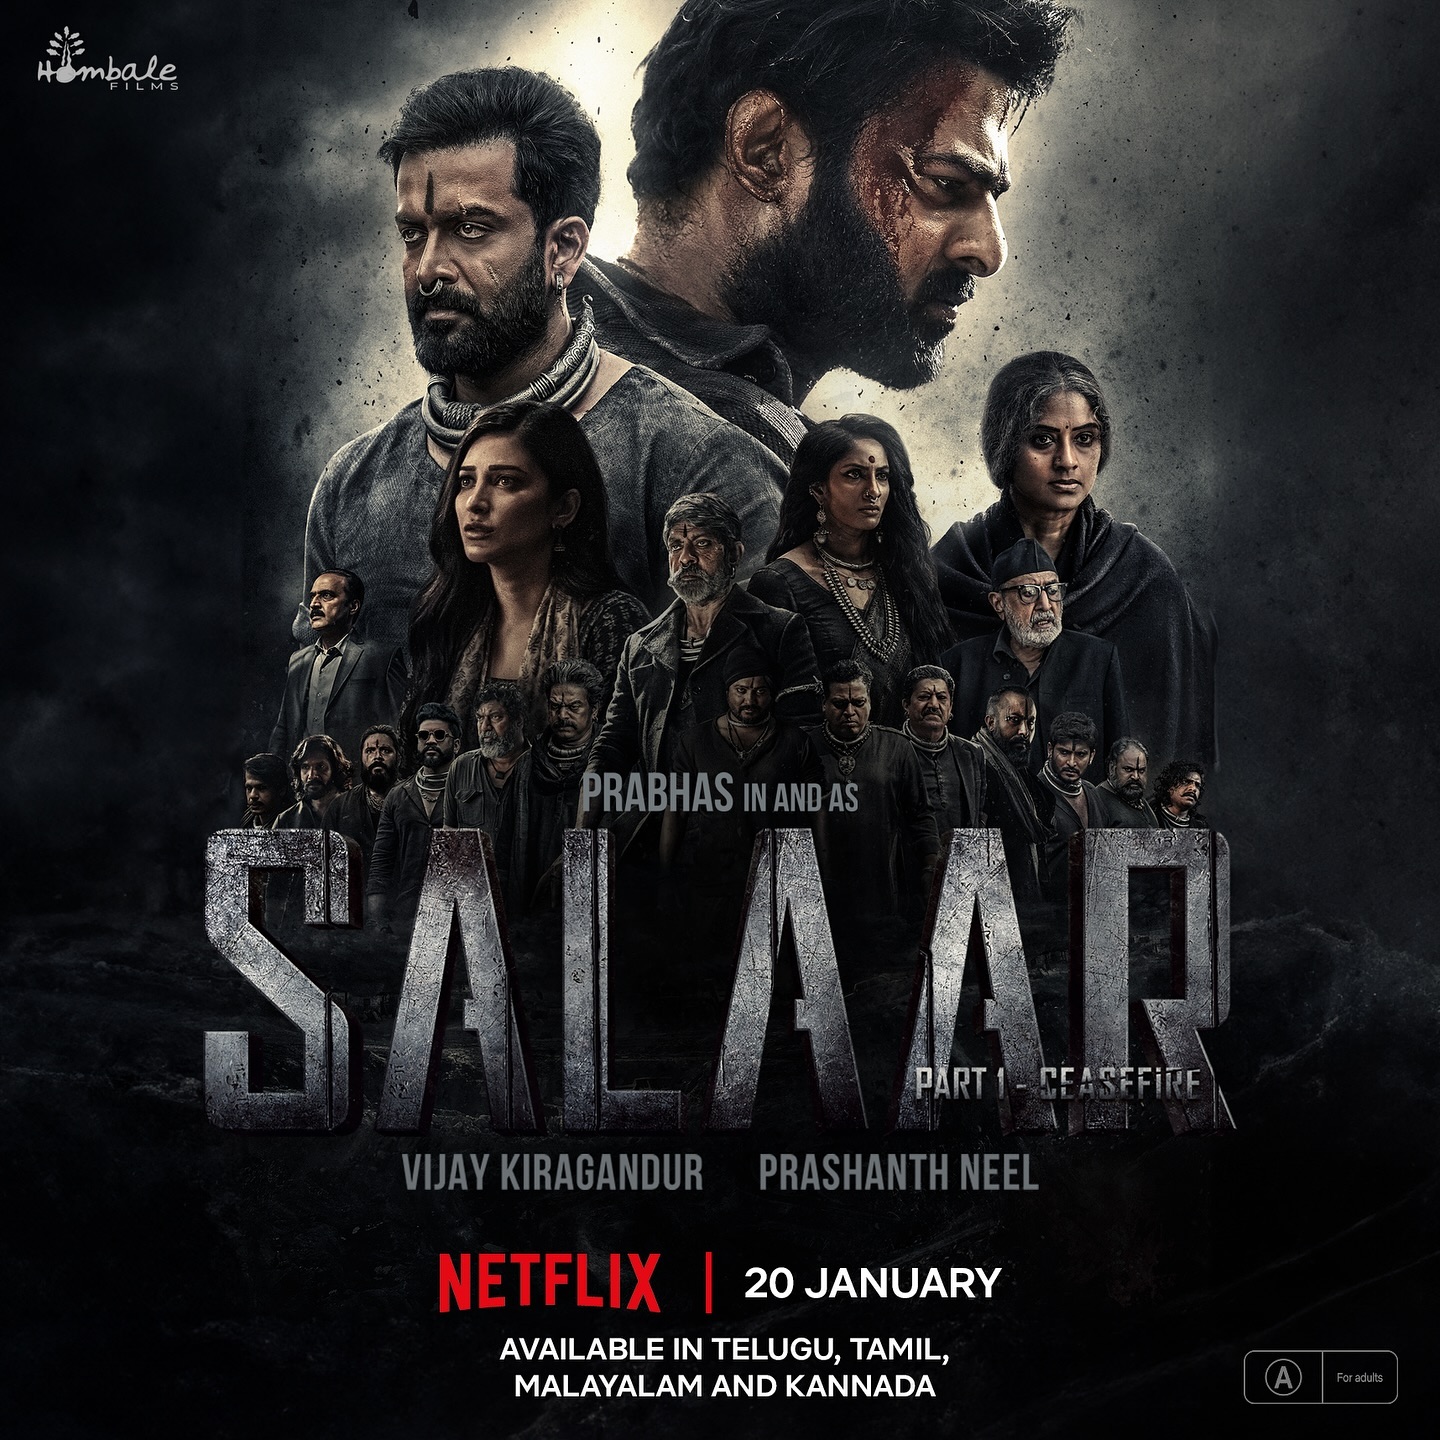 Salaar On Netflix Everything You Should Know About The OTT Release Of